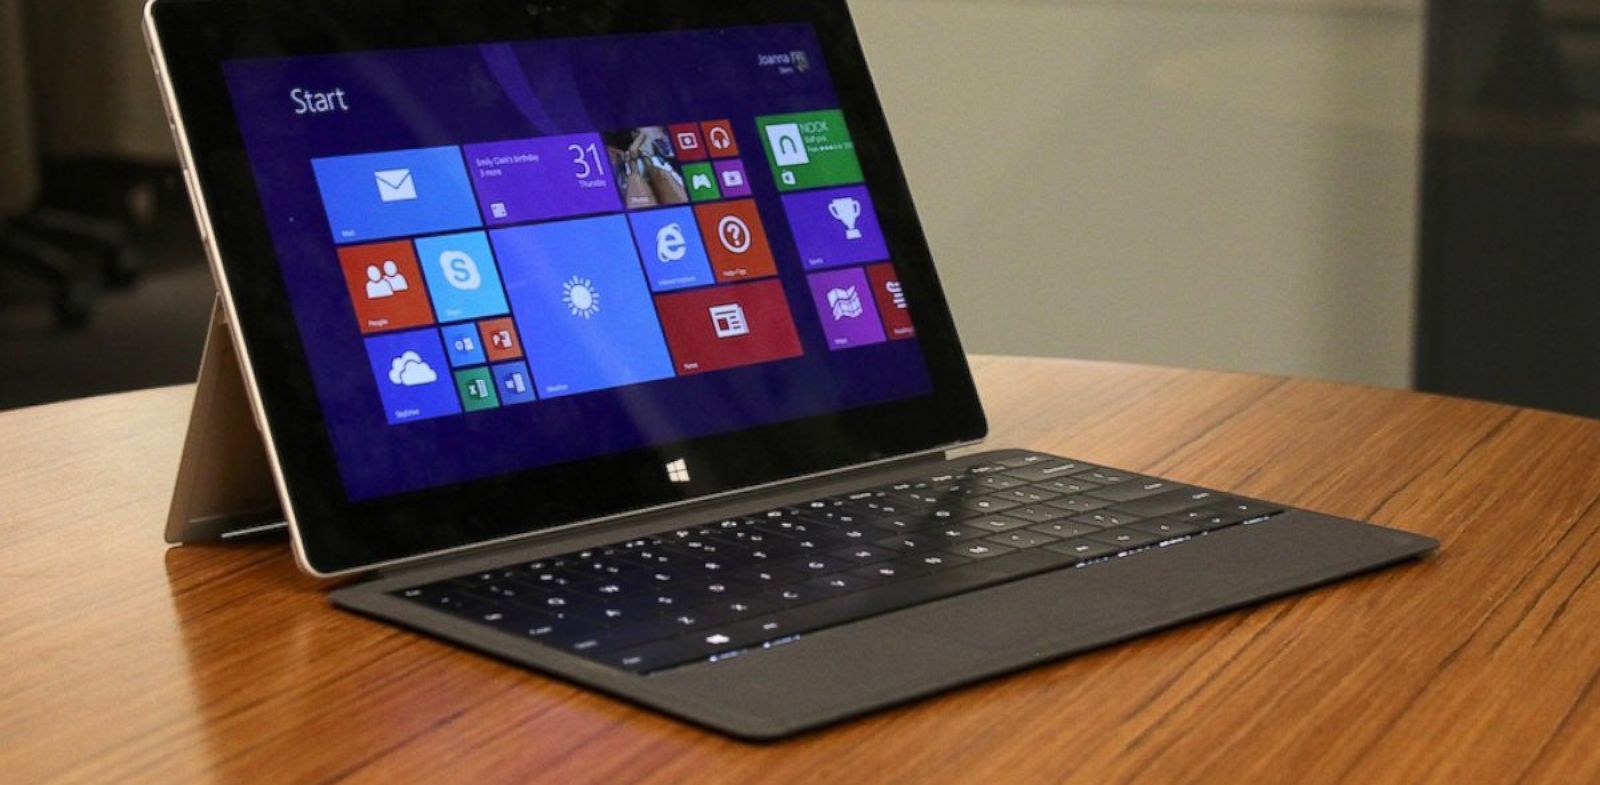 Microsoft Surface 2 Review: Does Microsoft’s Tablet Deserve a Second